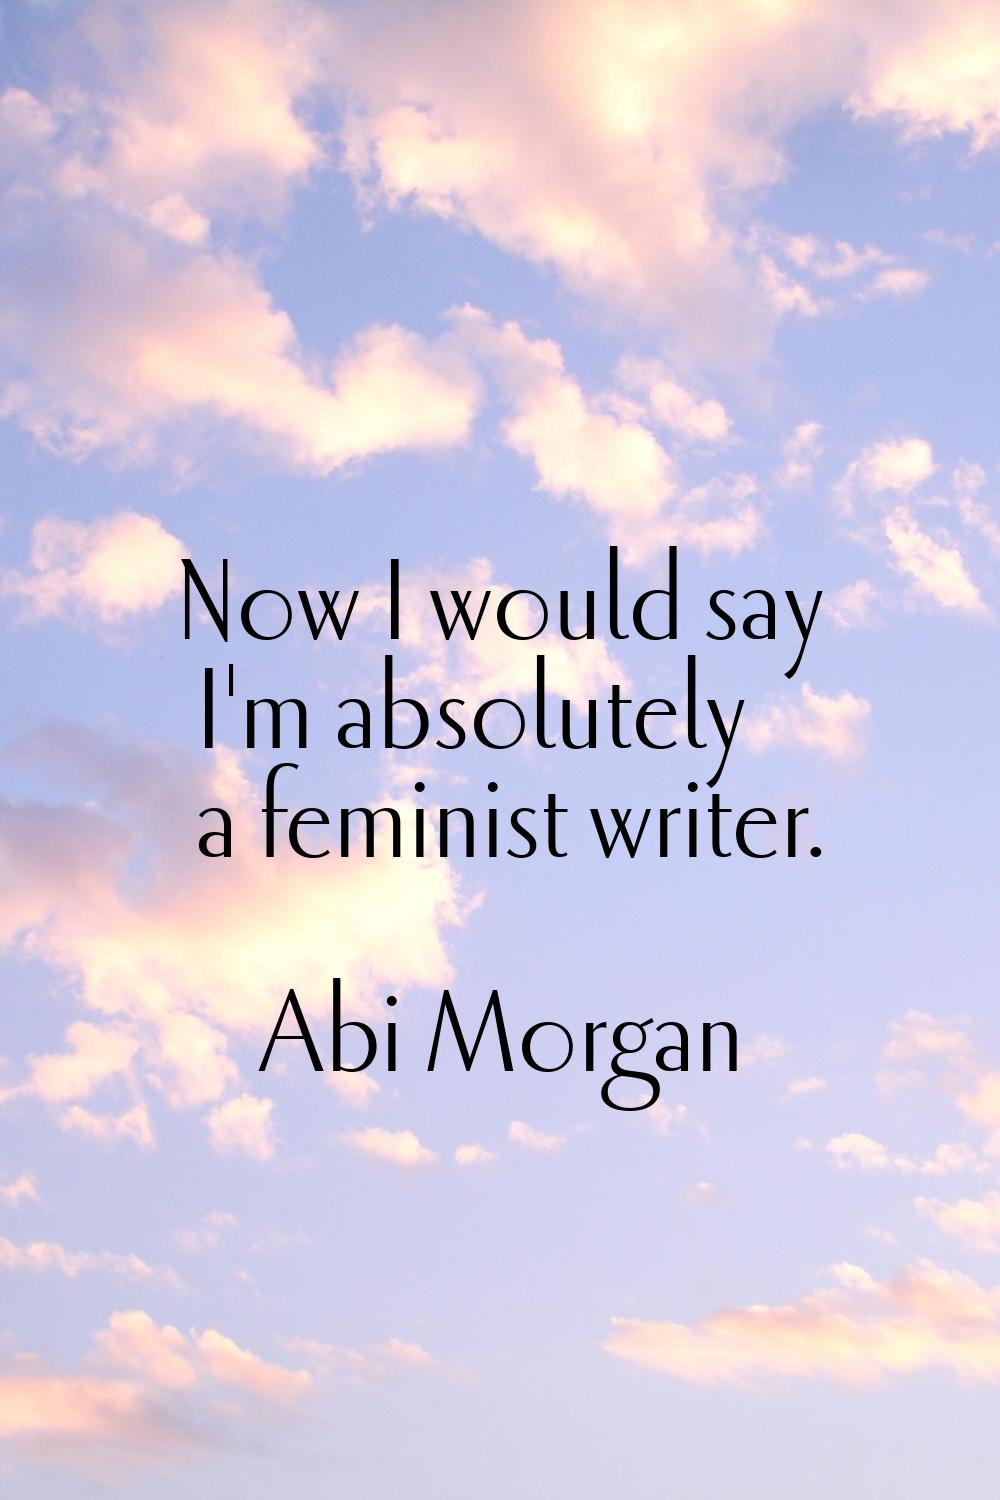 Now I would say I'm absolutely a feminist writer.